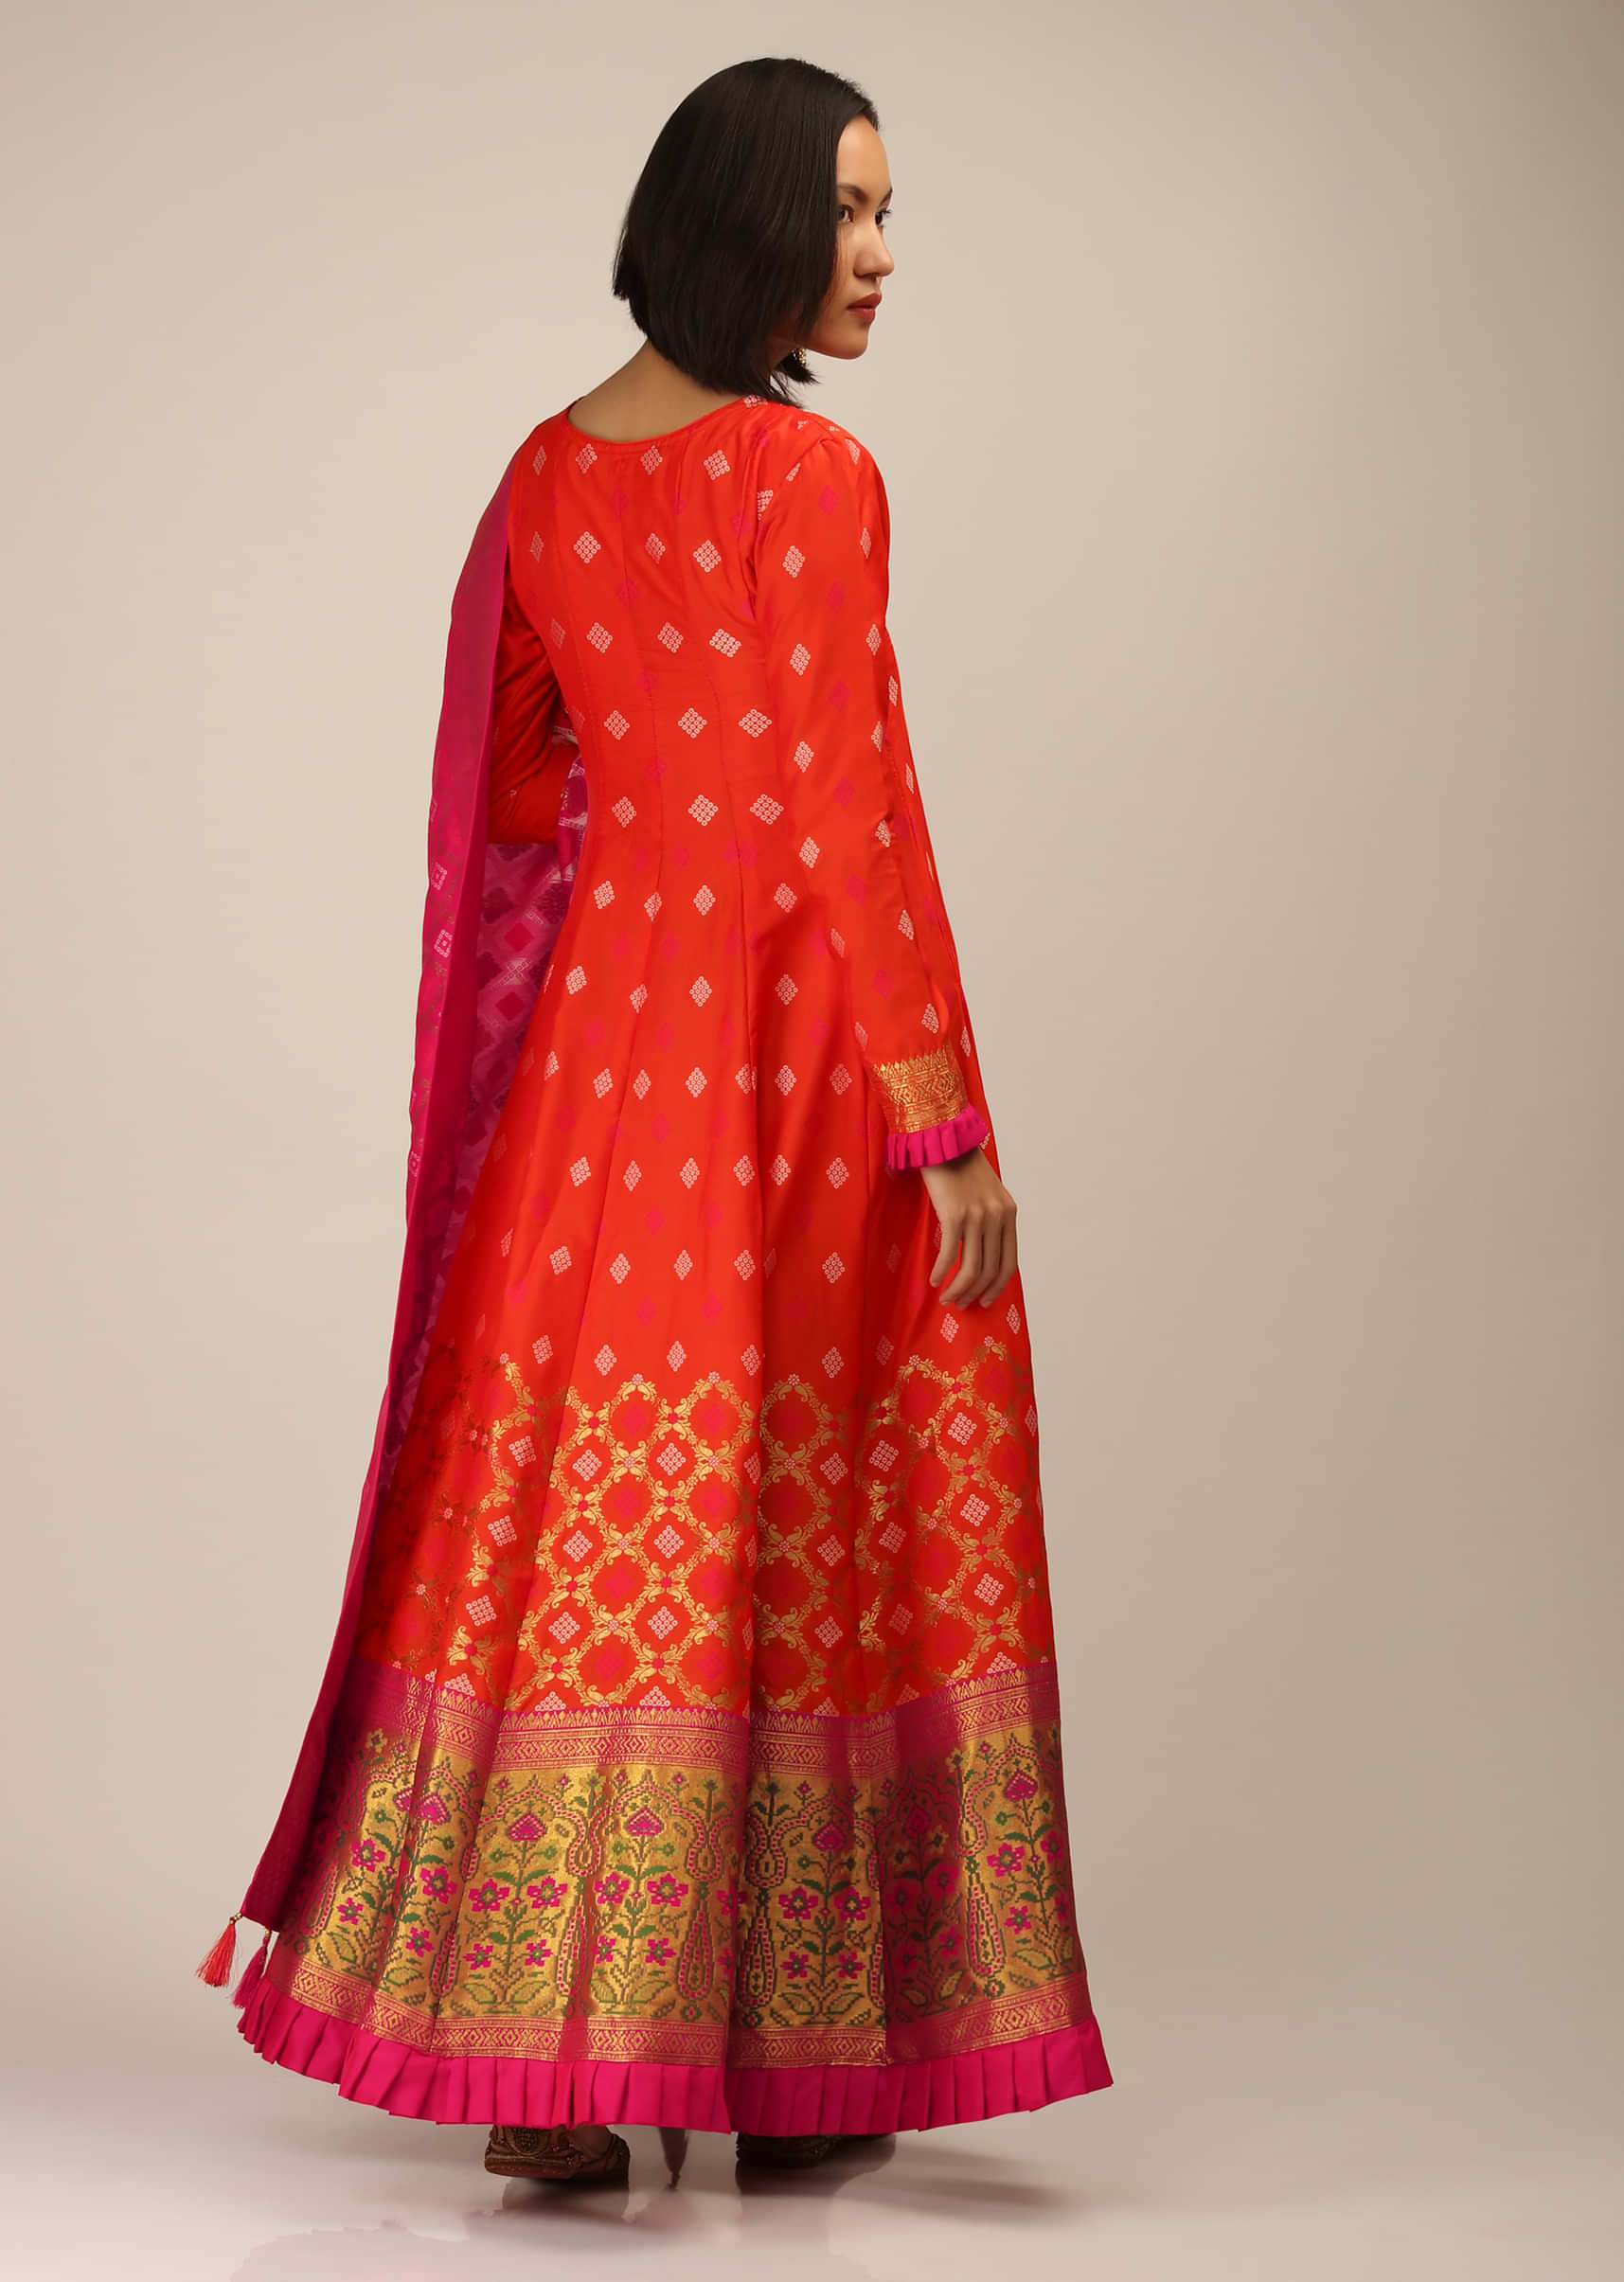 Coral Anarkali Suit In Brocade Silk With Woven Buttis And Zardosi Embroidery